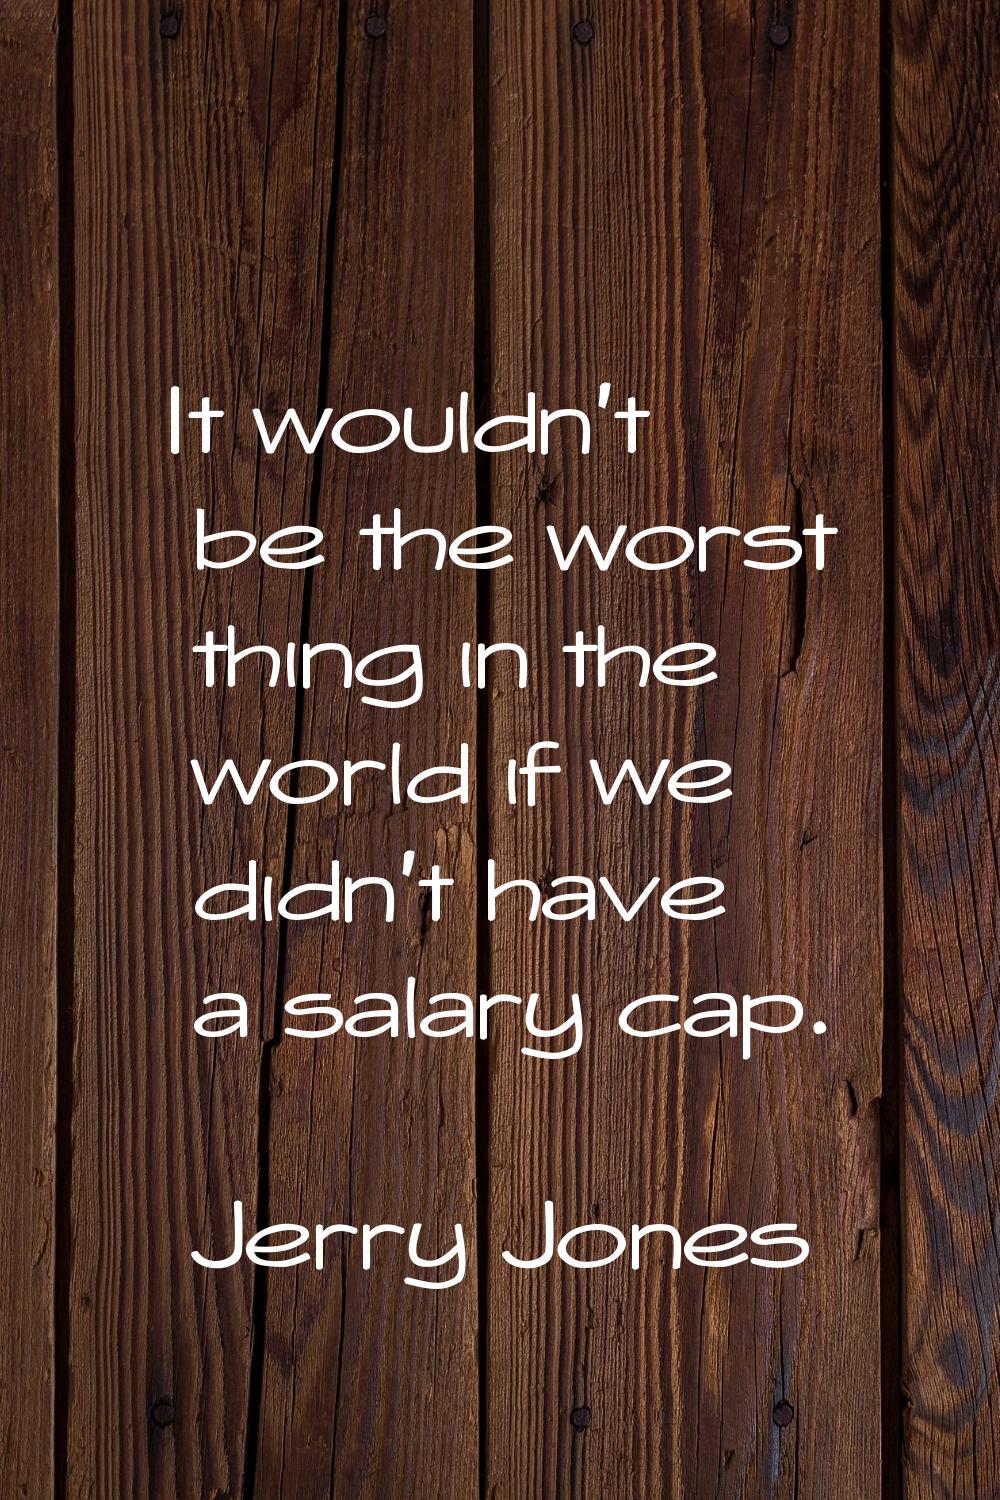 It wouldn't be the worst thing in the world if we didn't have a salary cap.